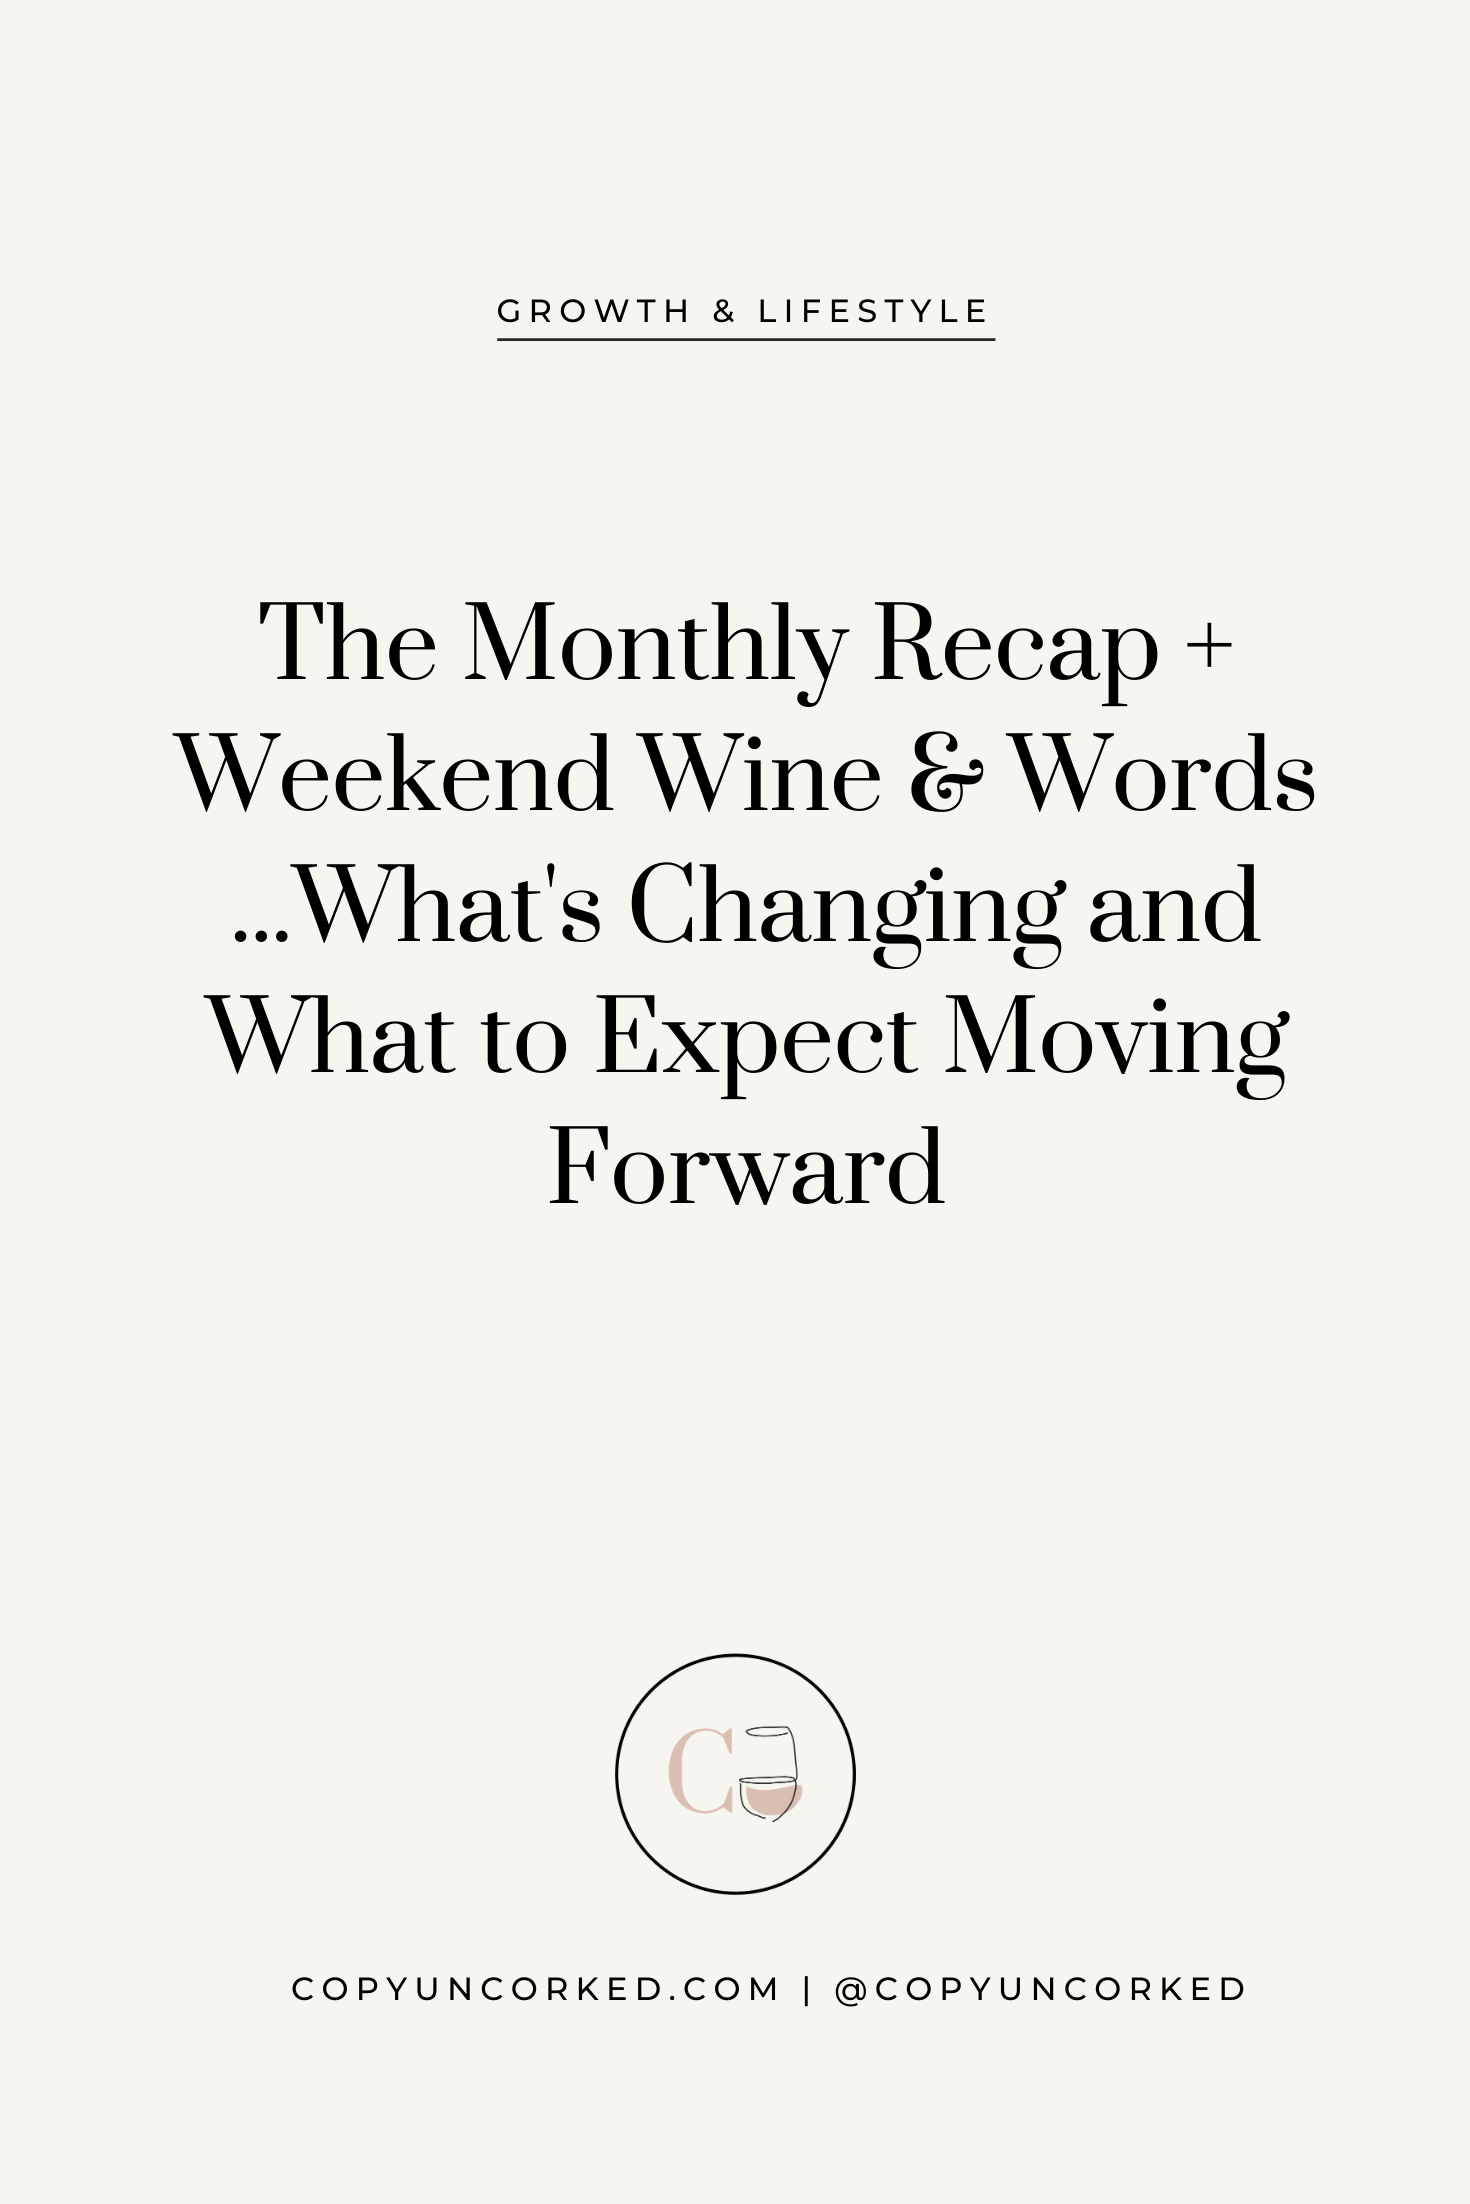 The Monthly Recap...is Moving! Where to Find It Moving Forward - copyuncorked.com